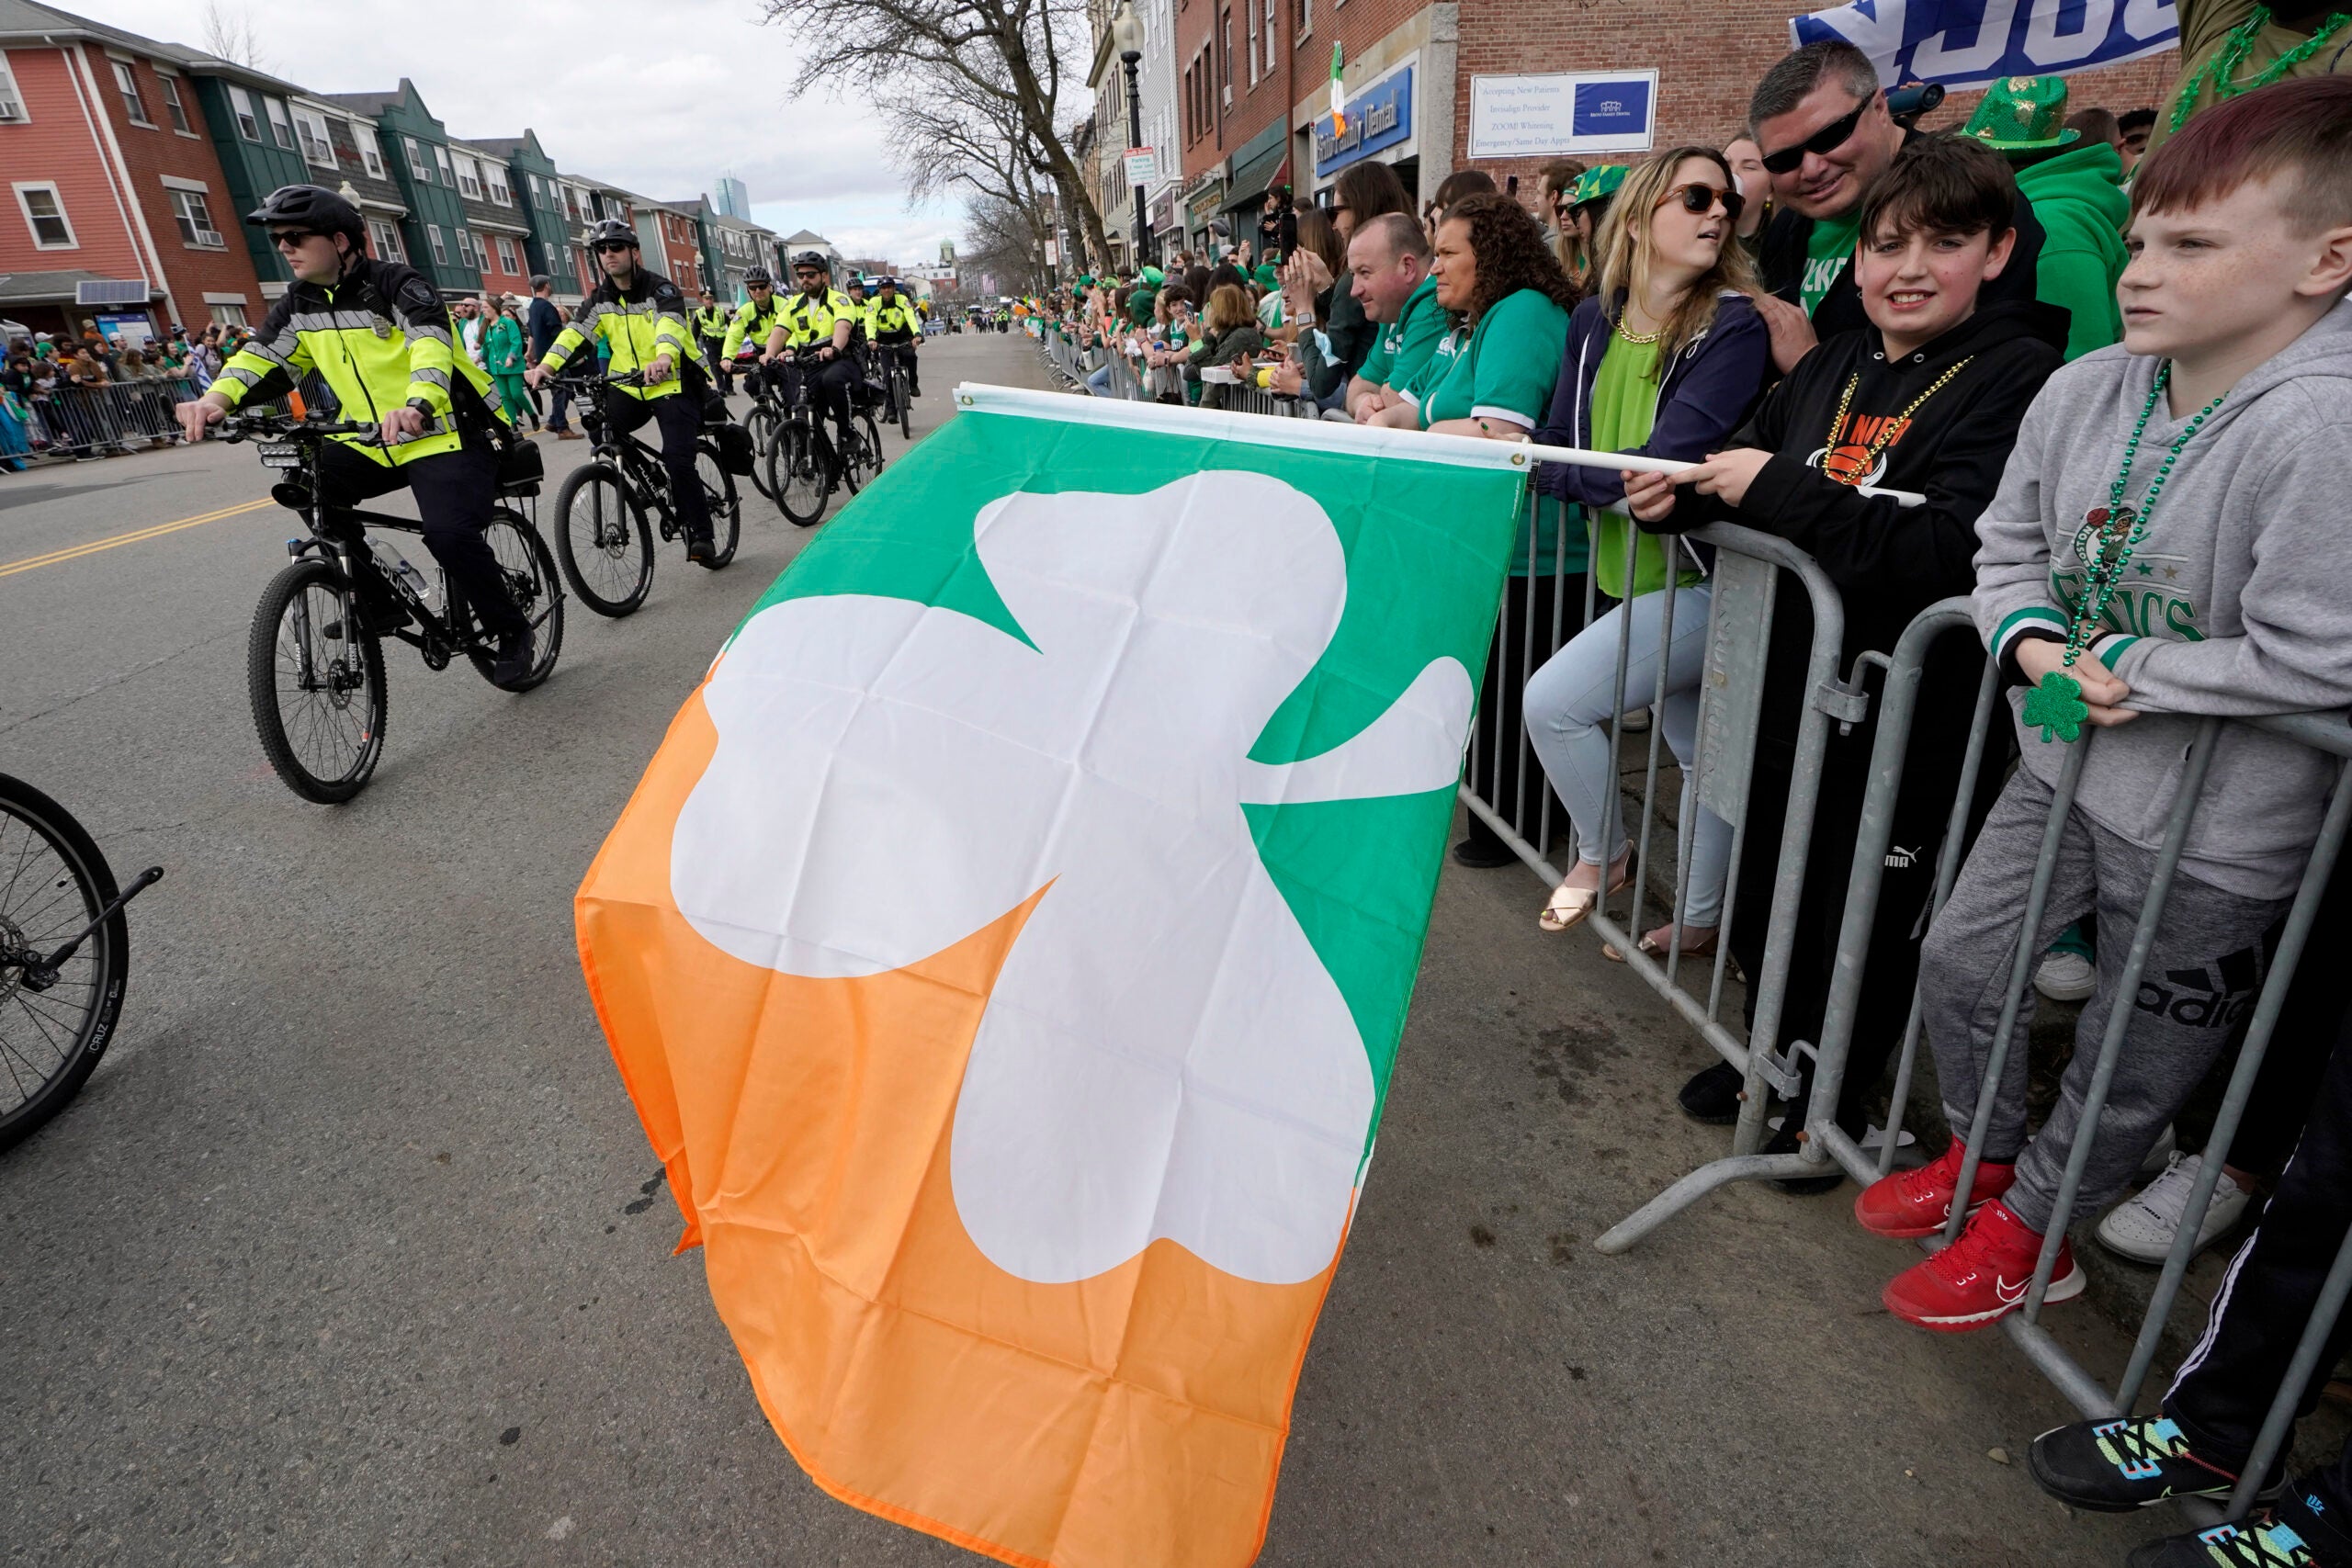 Here's how Mass. ranks against other states in terms of Irish population